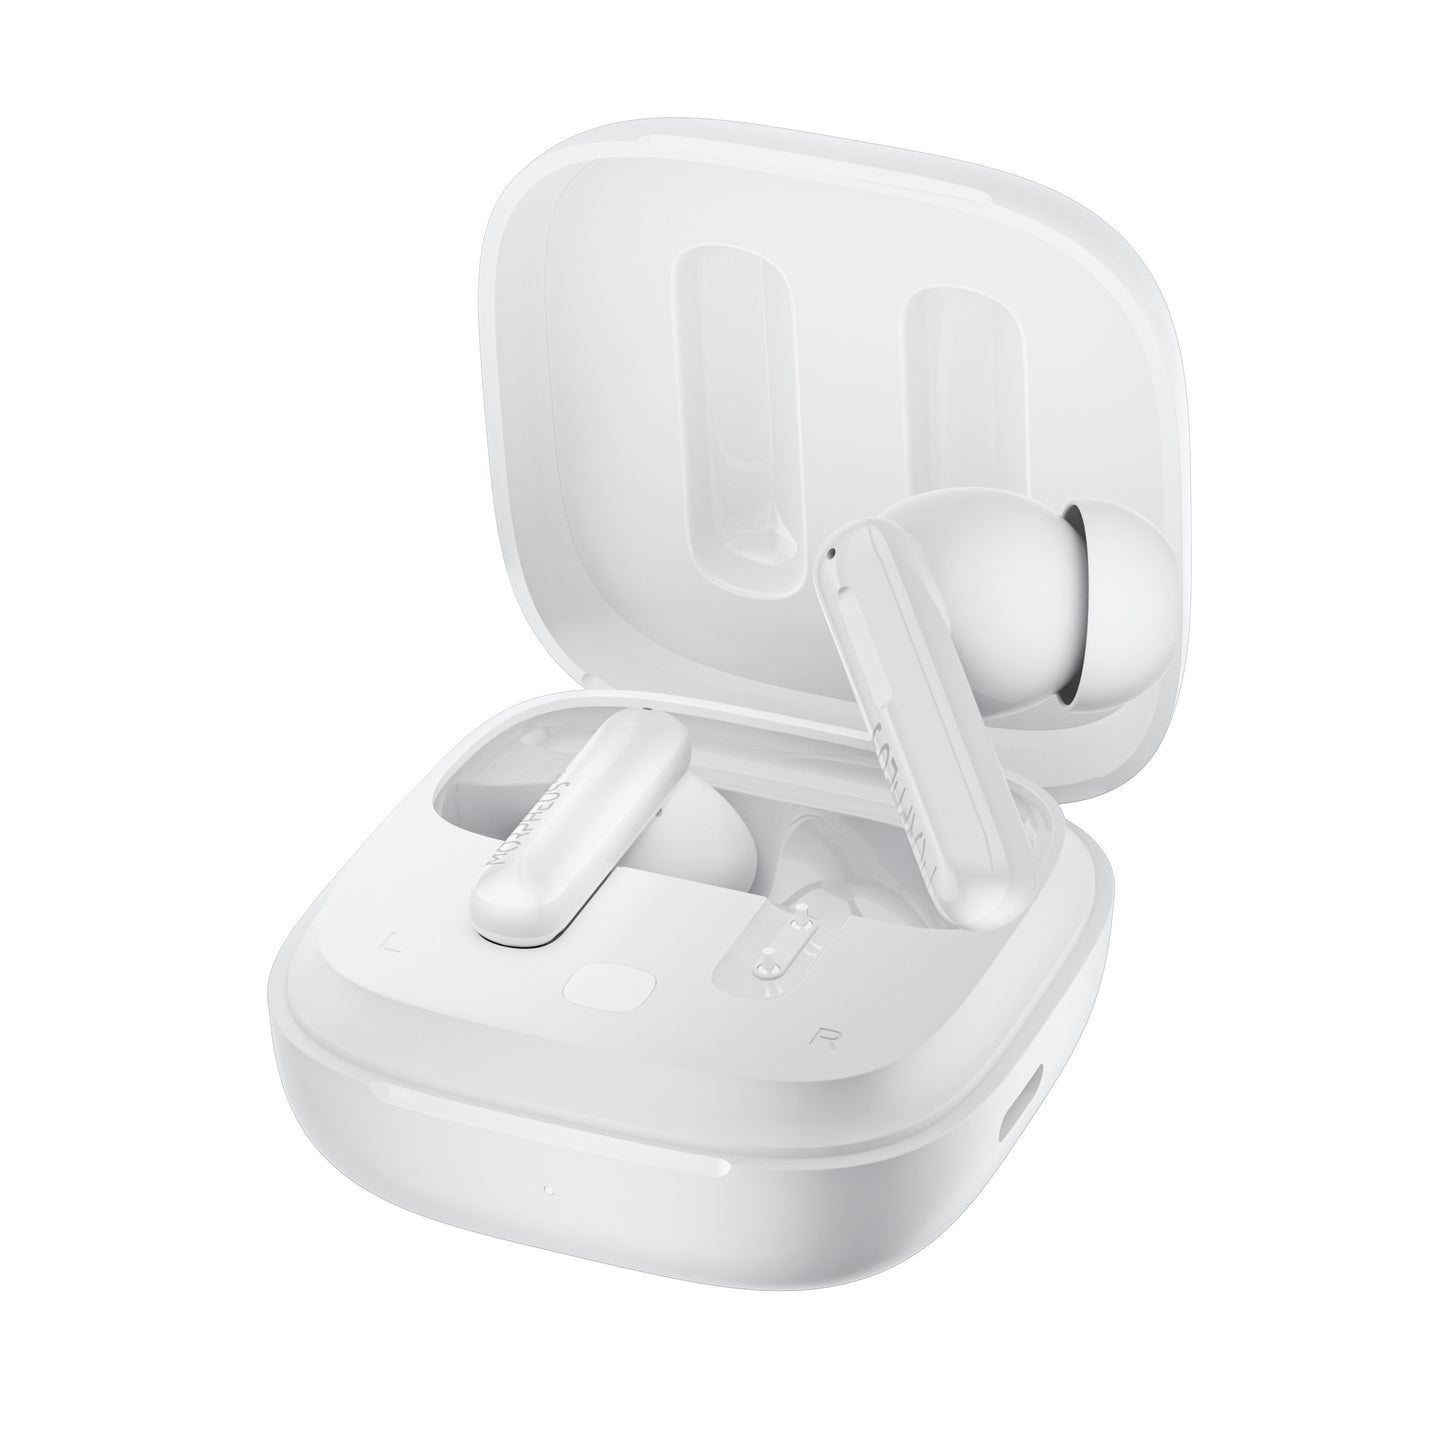 Photo of Morpheus 360 Nemesis ANC True Wireless Earbuds in white, front view with charging case open, the right stick earbud is above outside of the charging case at an angle while the left earbud is resting in charging case